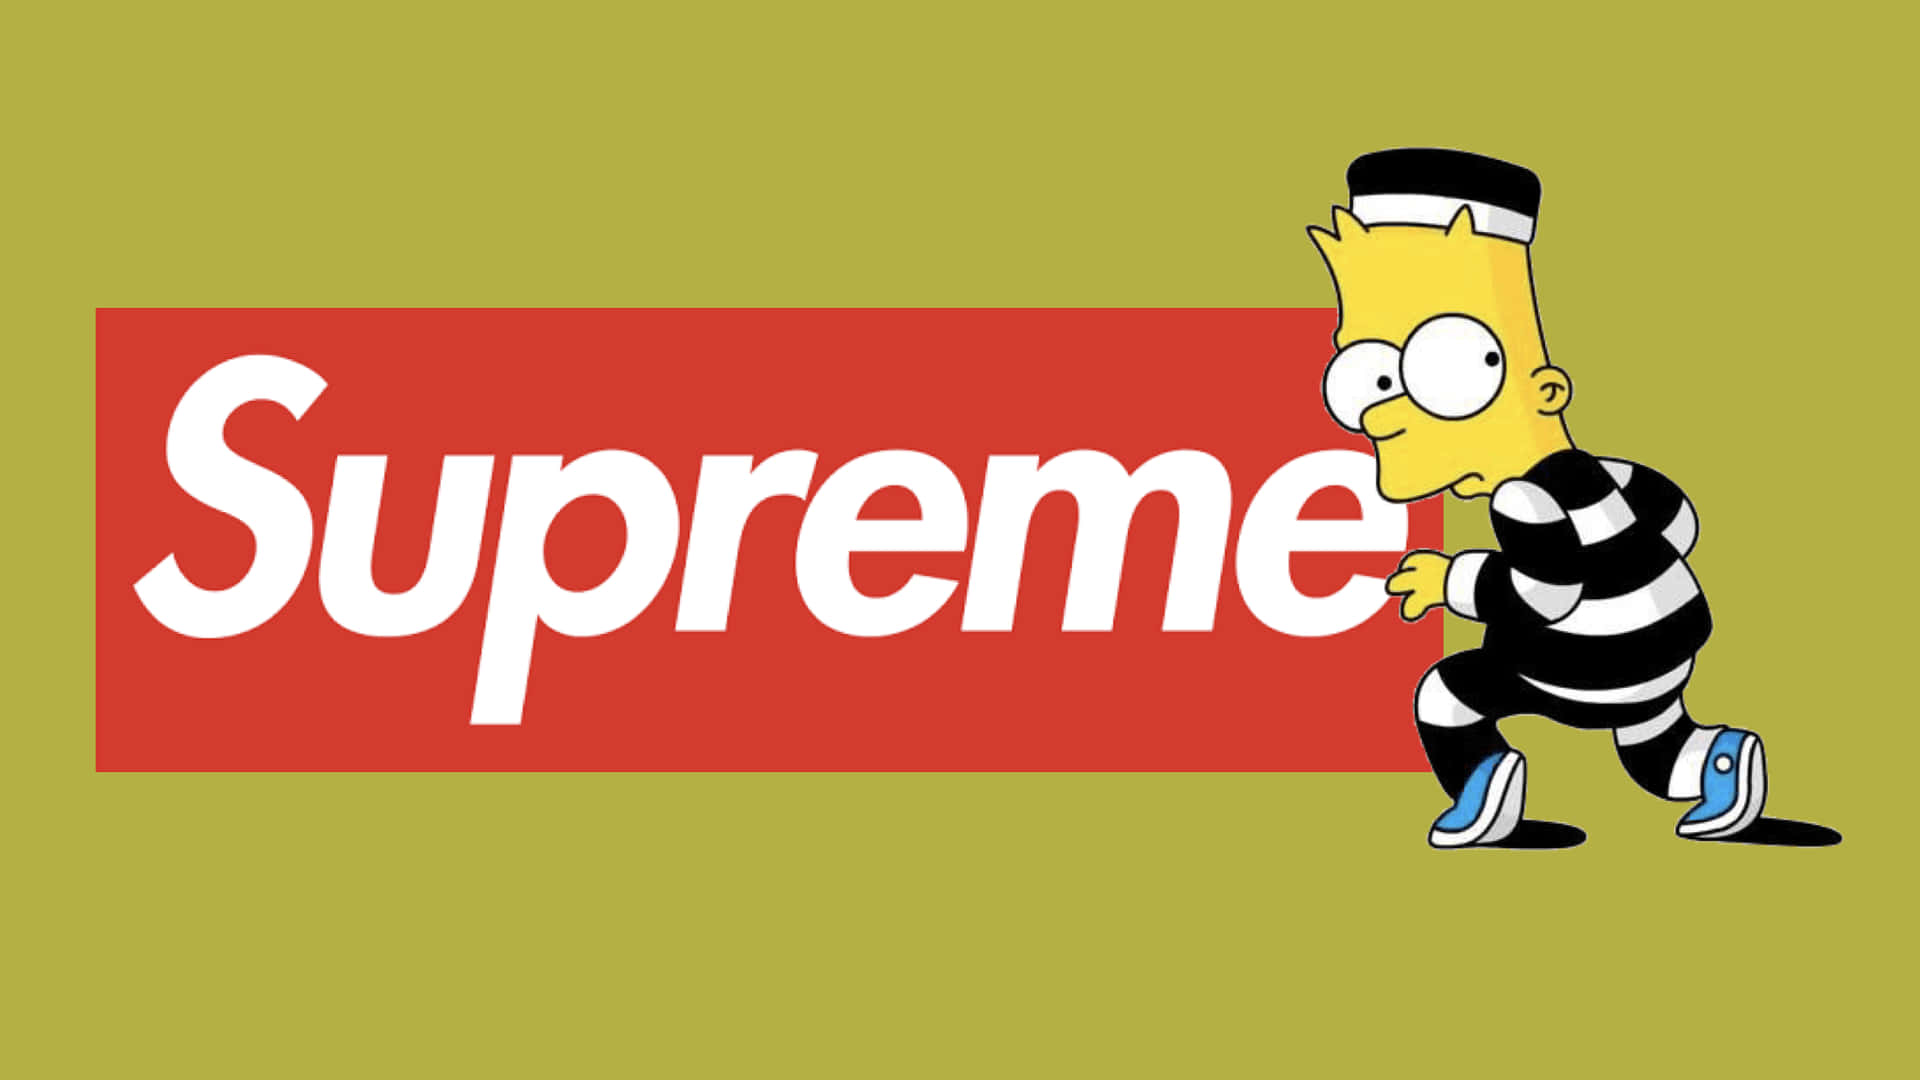 Show off your bold style with Supreme's iconic Simpsons-inspired prints. Wallpaper